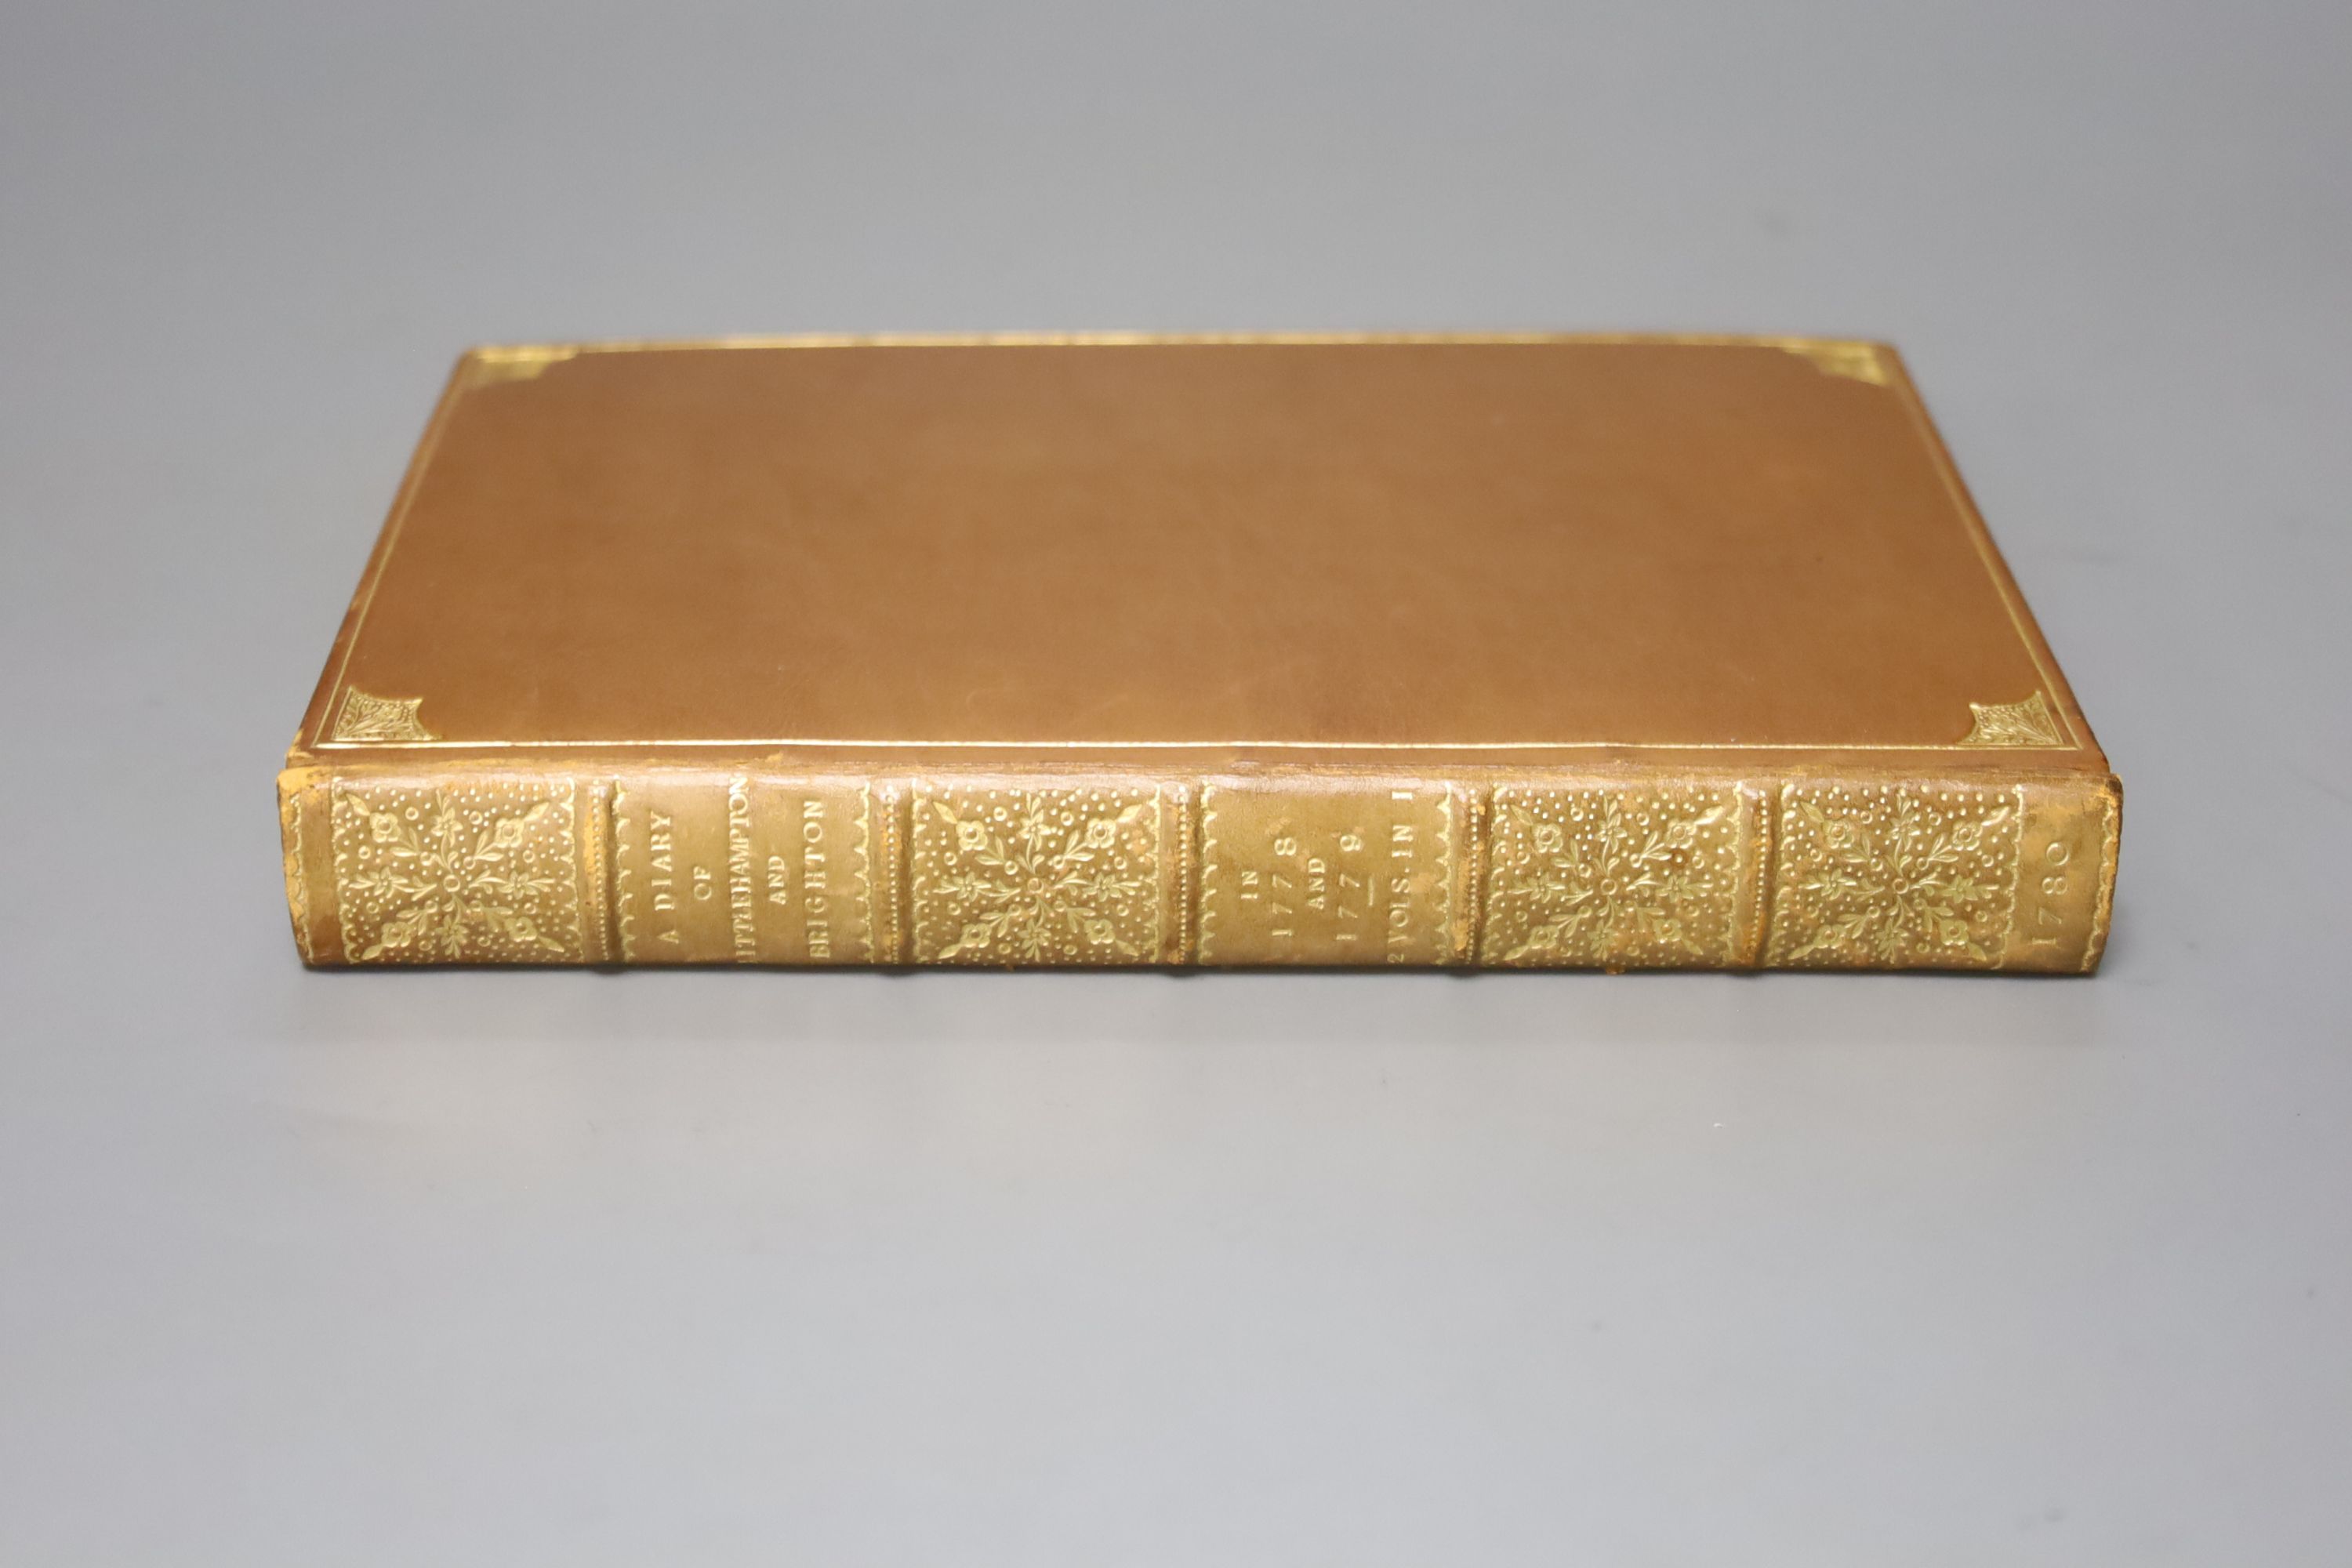 A diary kept in excursion to Littlehampton and Brighthelmstone 1778/9, vol I